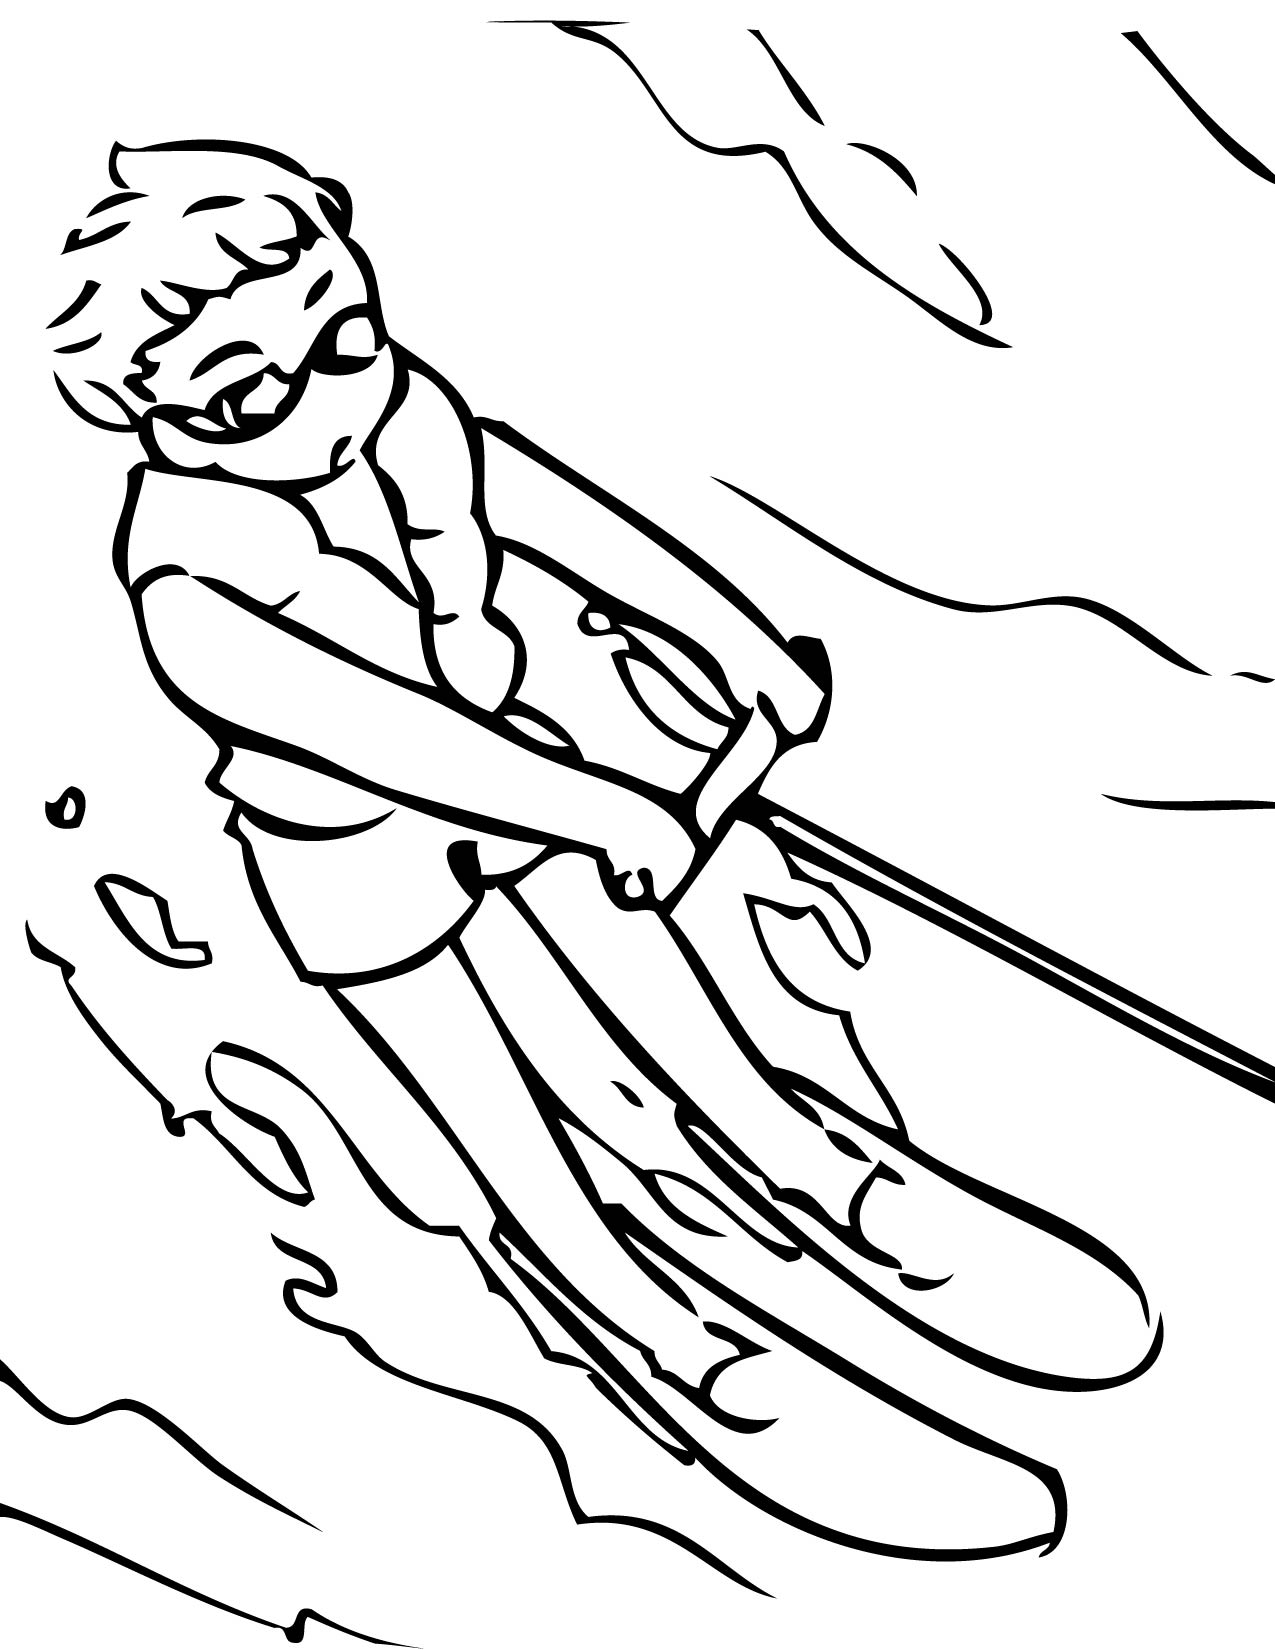 Kids-n-fun.com | 9 coloring pages of Water skiing